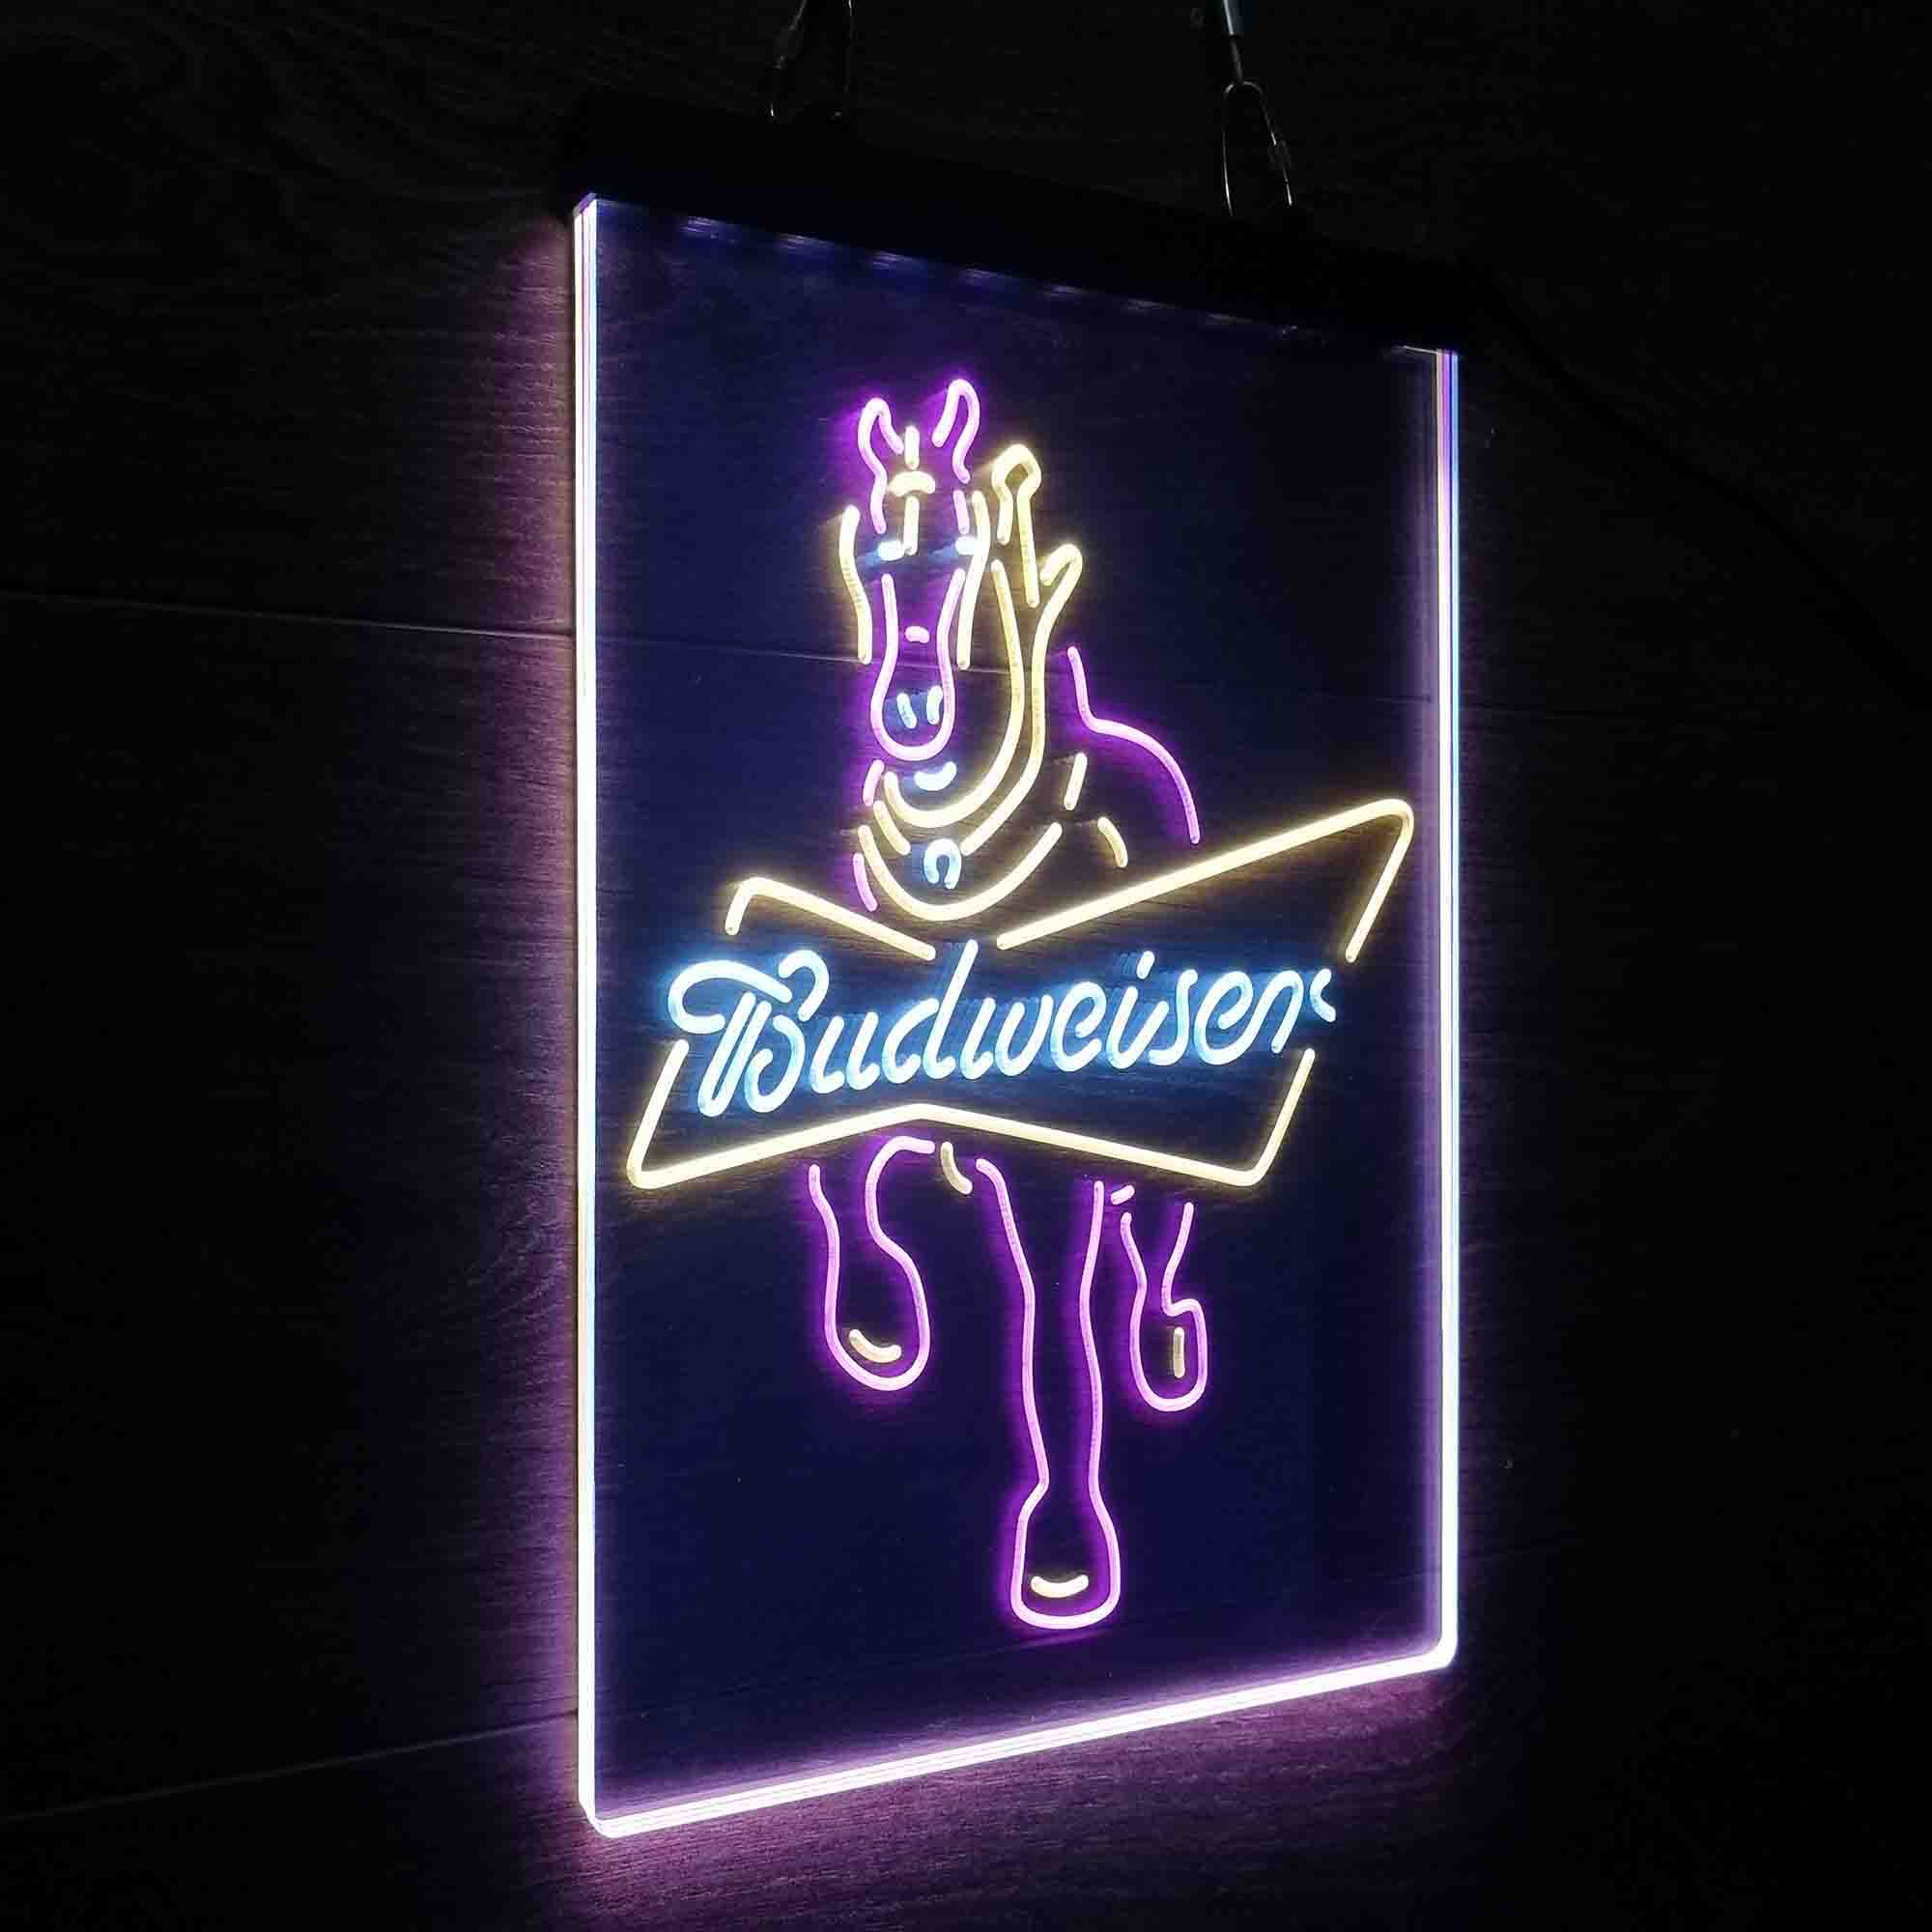 Budweiser Clydesdale Horse Neon LED Sign 3 Colors